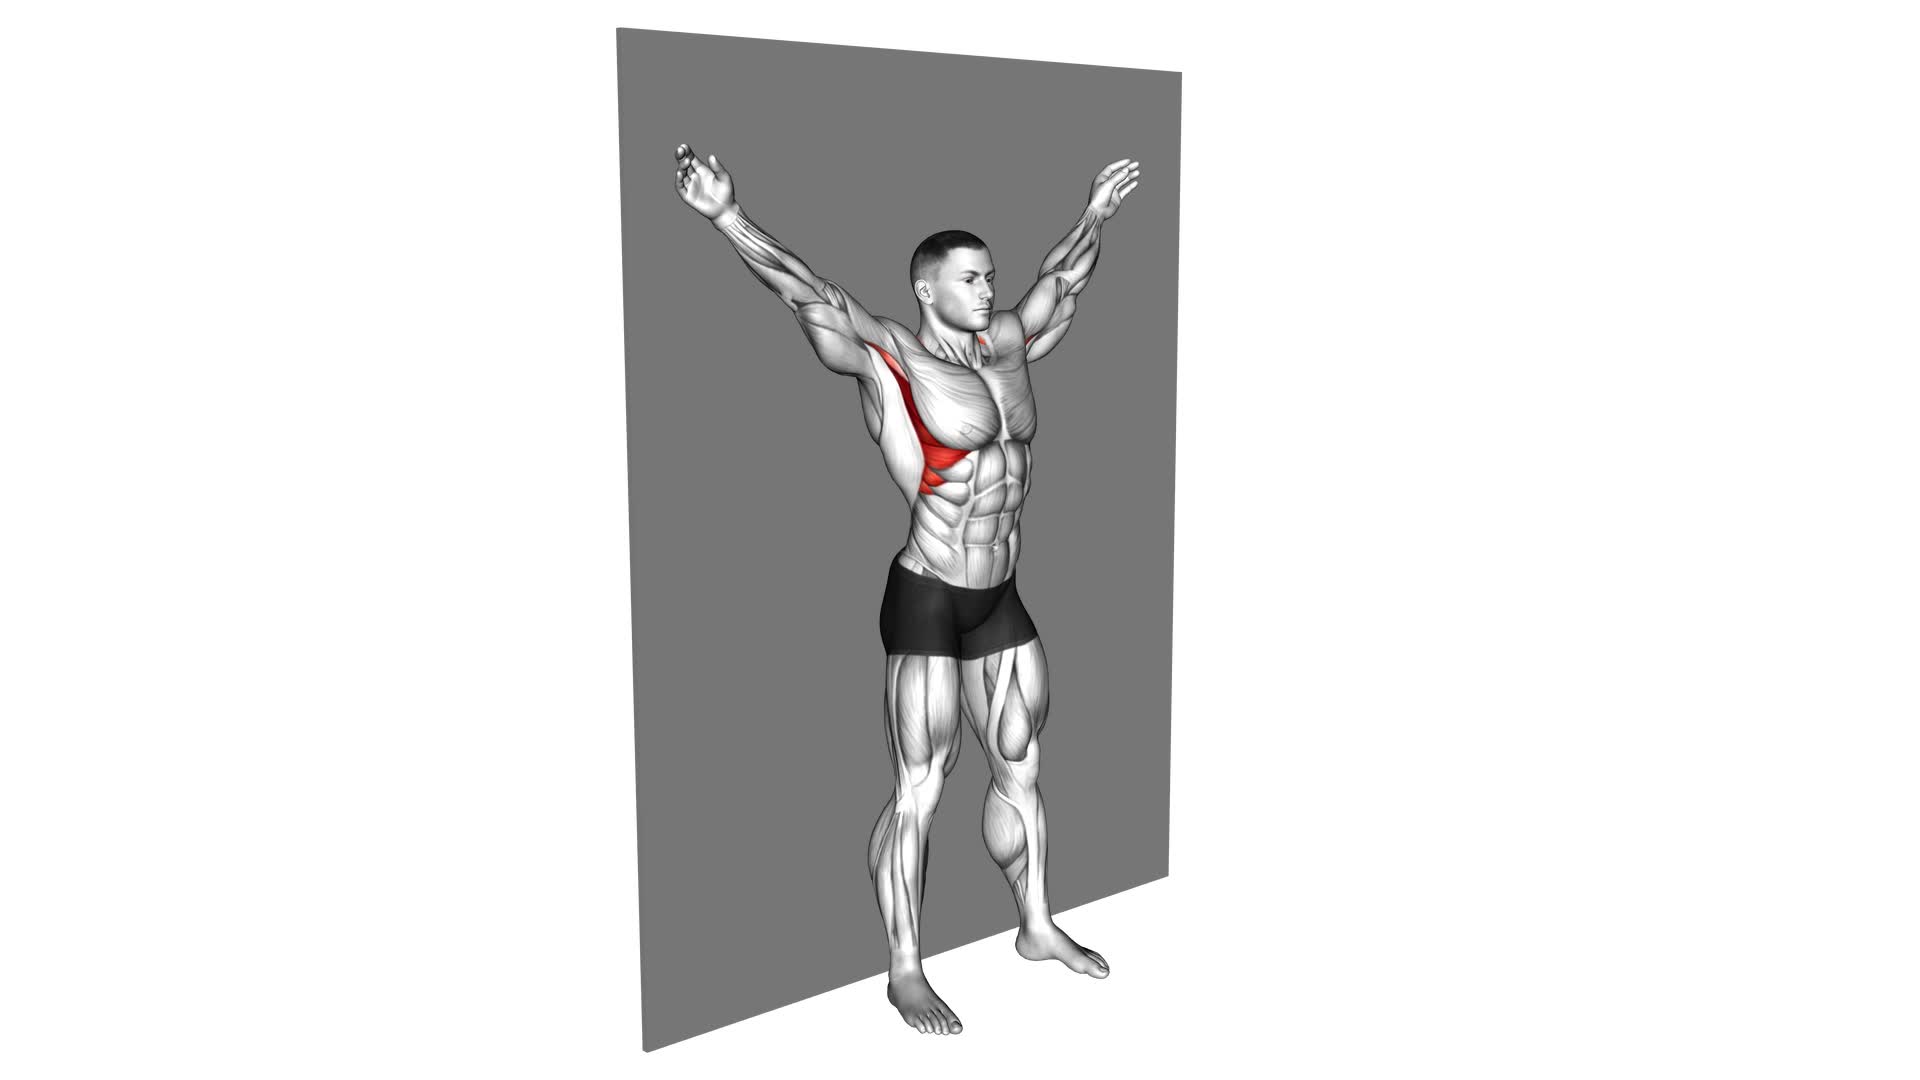 Scapular Slide Back to Wall - Video Exercise Guide & Tips